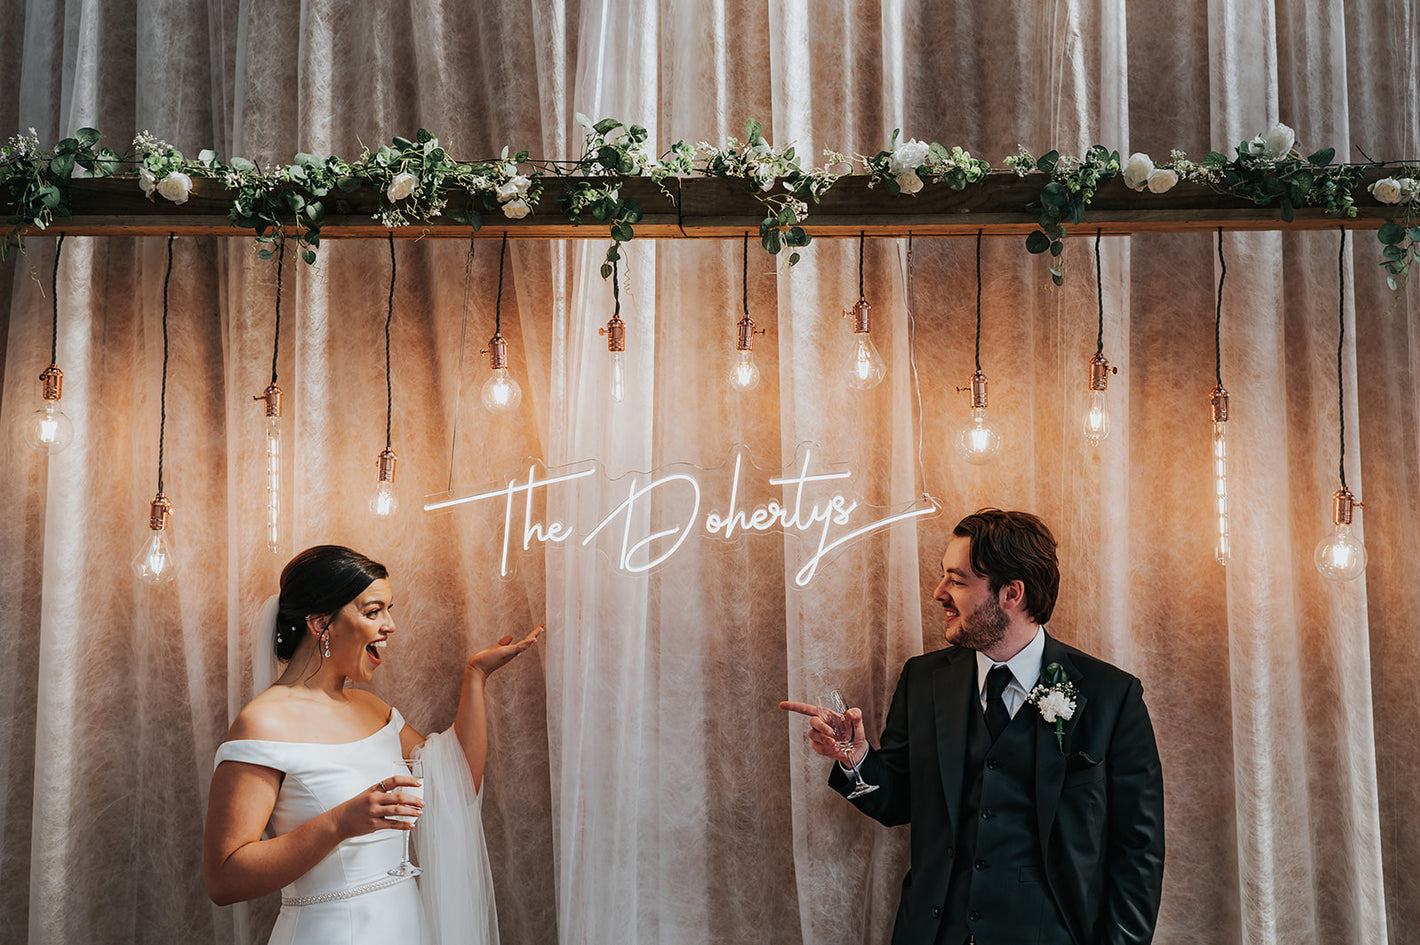 A custom LED neon sign hanging from a backdrop at a wedding that says the Dohertys which is the couples surname in Manchester, UK